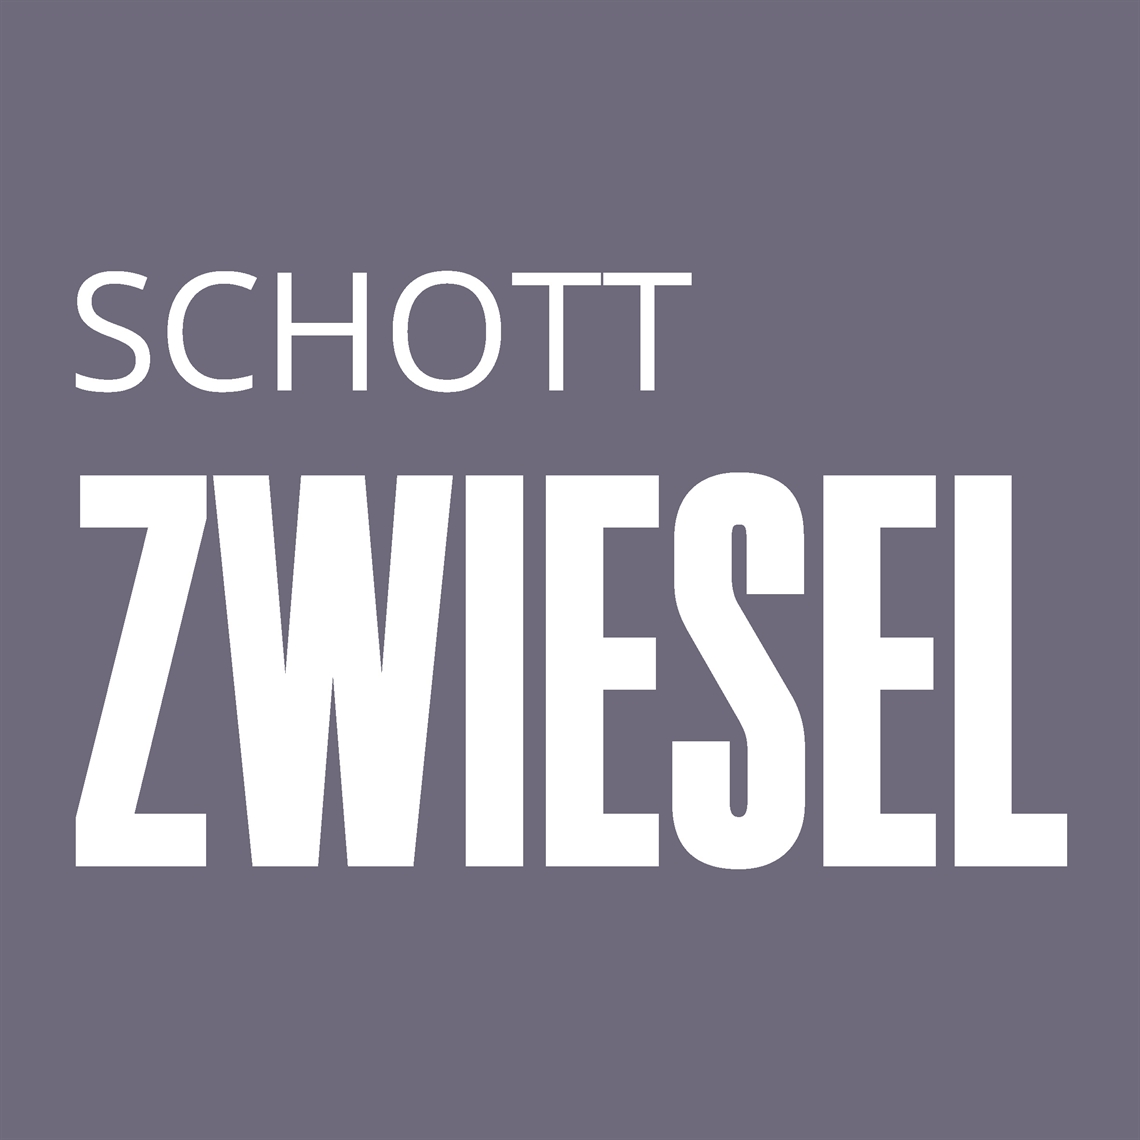 View our collection of Schott Zwiesel Alternative Spirit Glasses